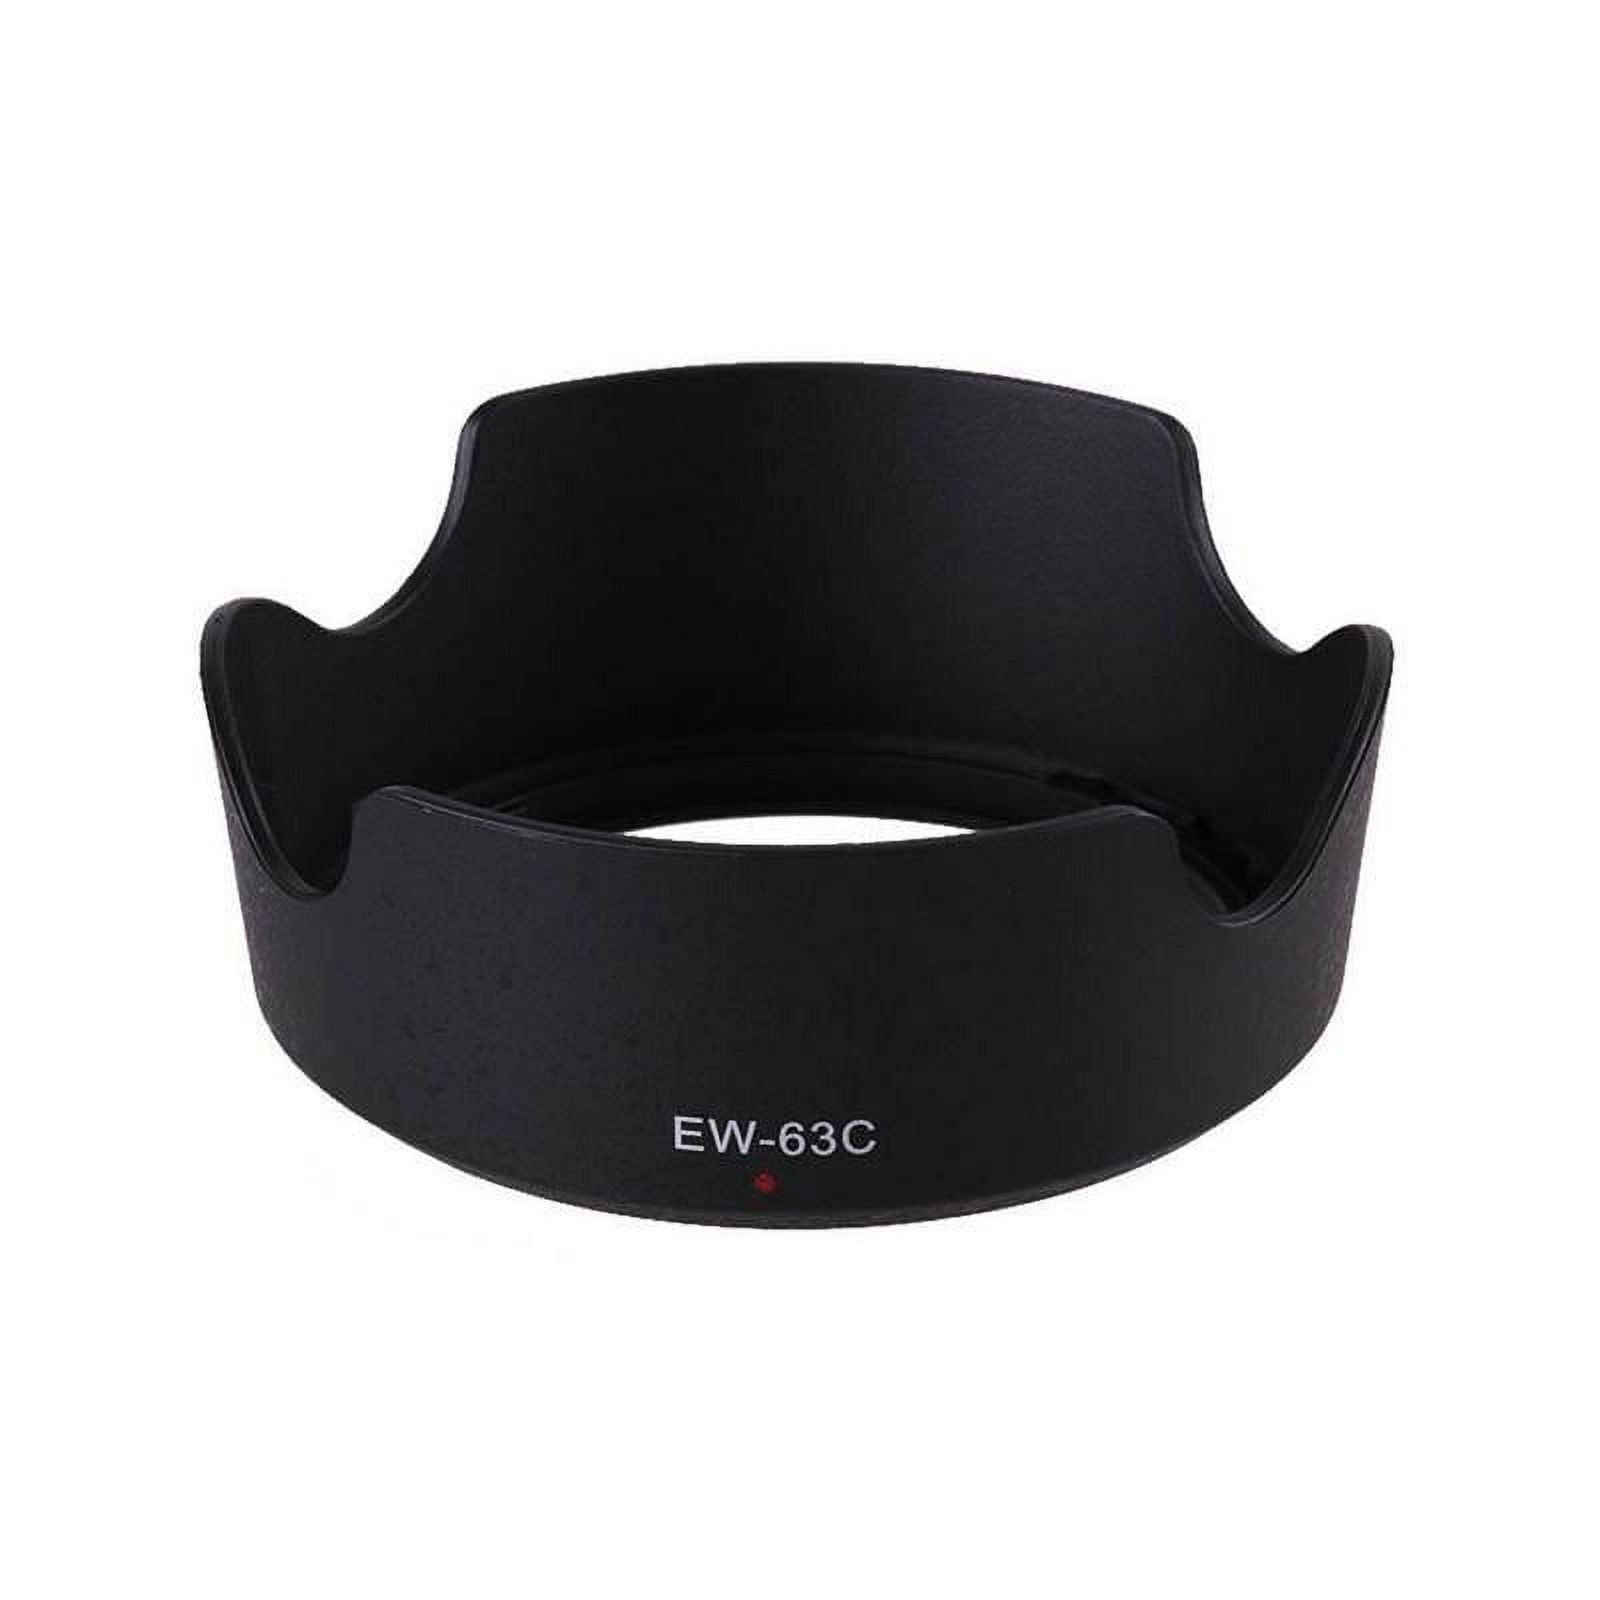 Canon EW-63C Lens Hood High Quality Replace Camera Lens Petal Hood for  Canon EF-S 18-55mm f/3.5-5.6 IS STM